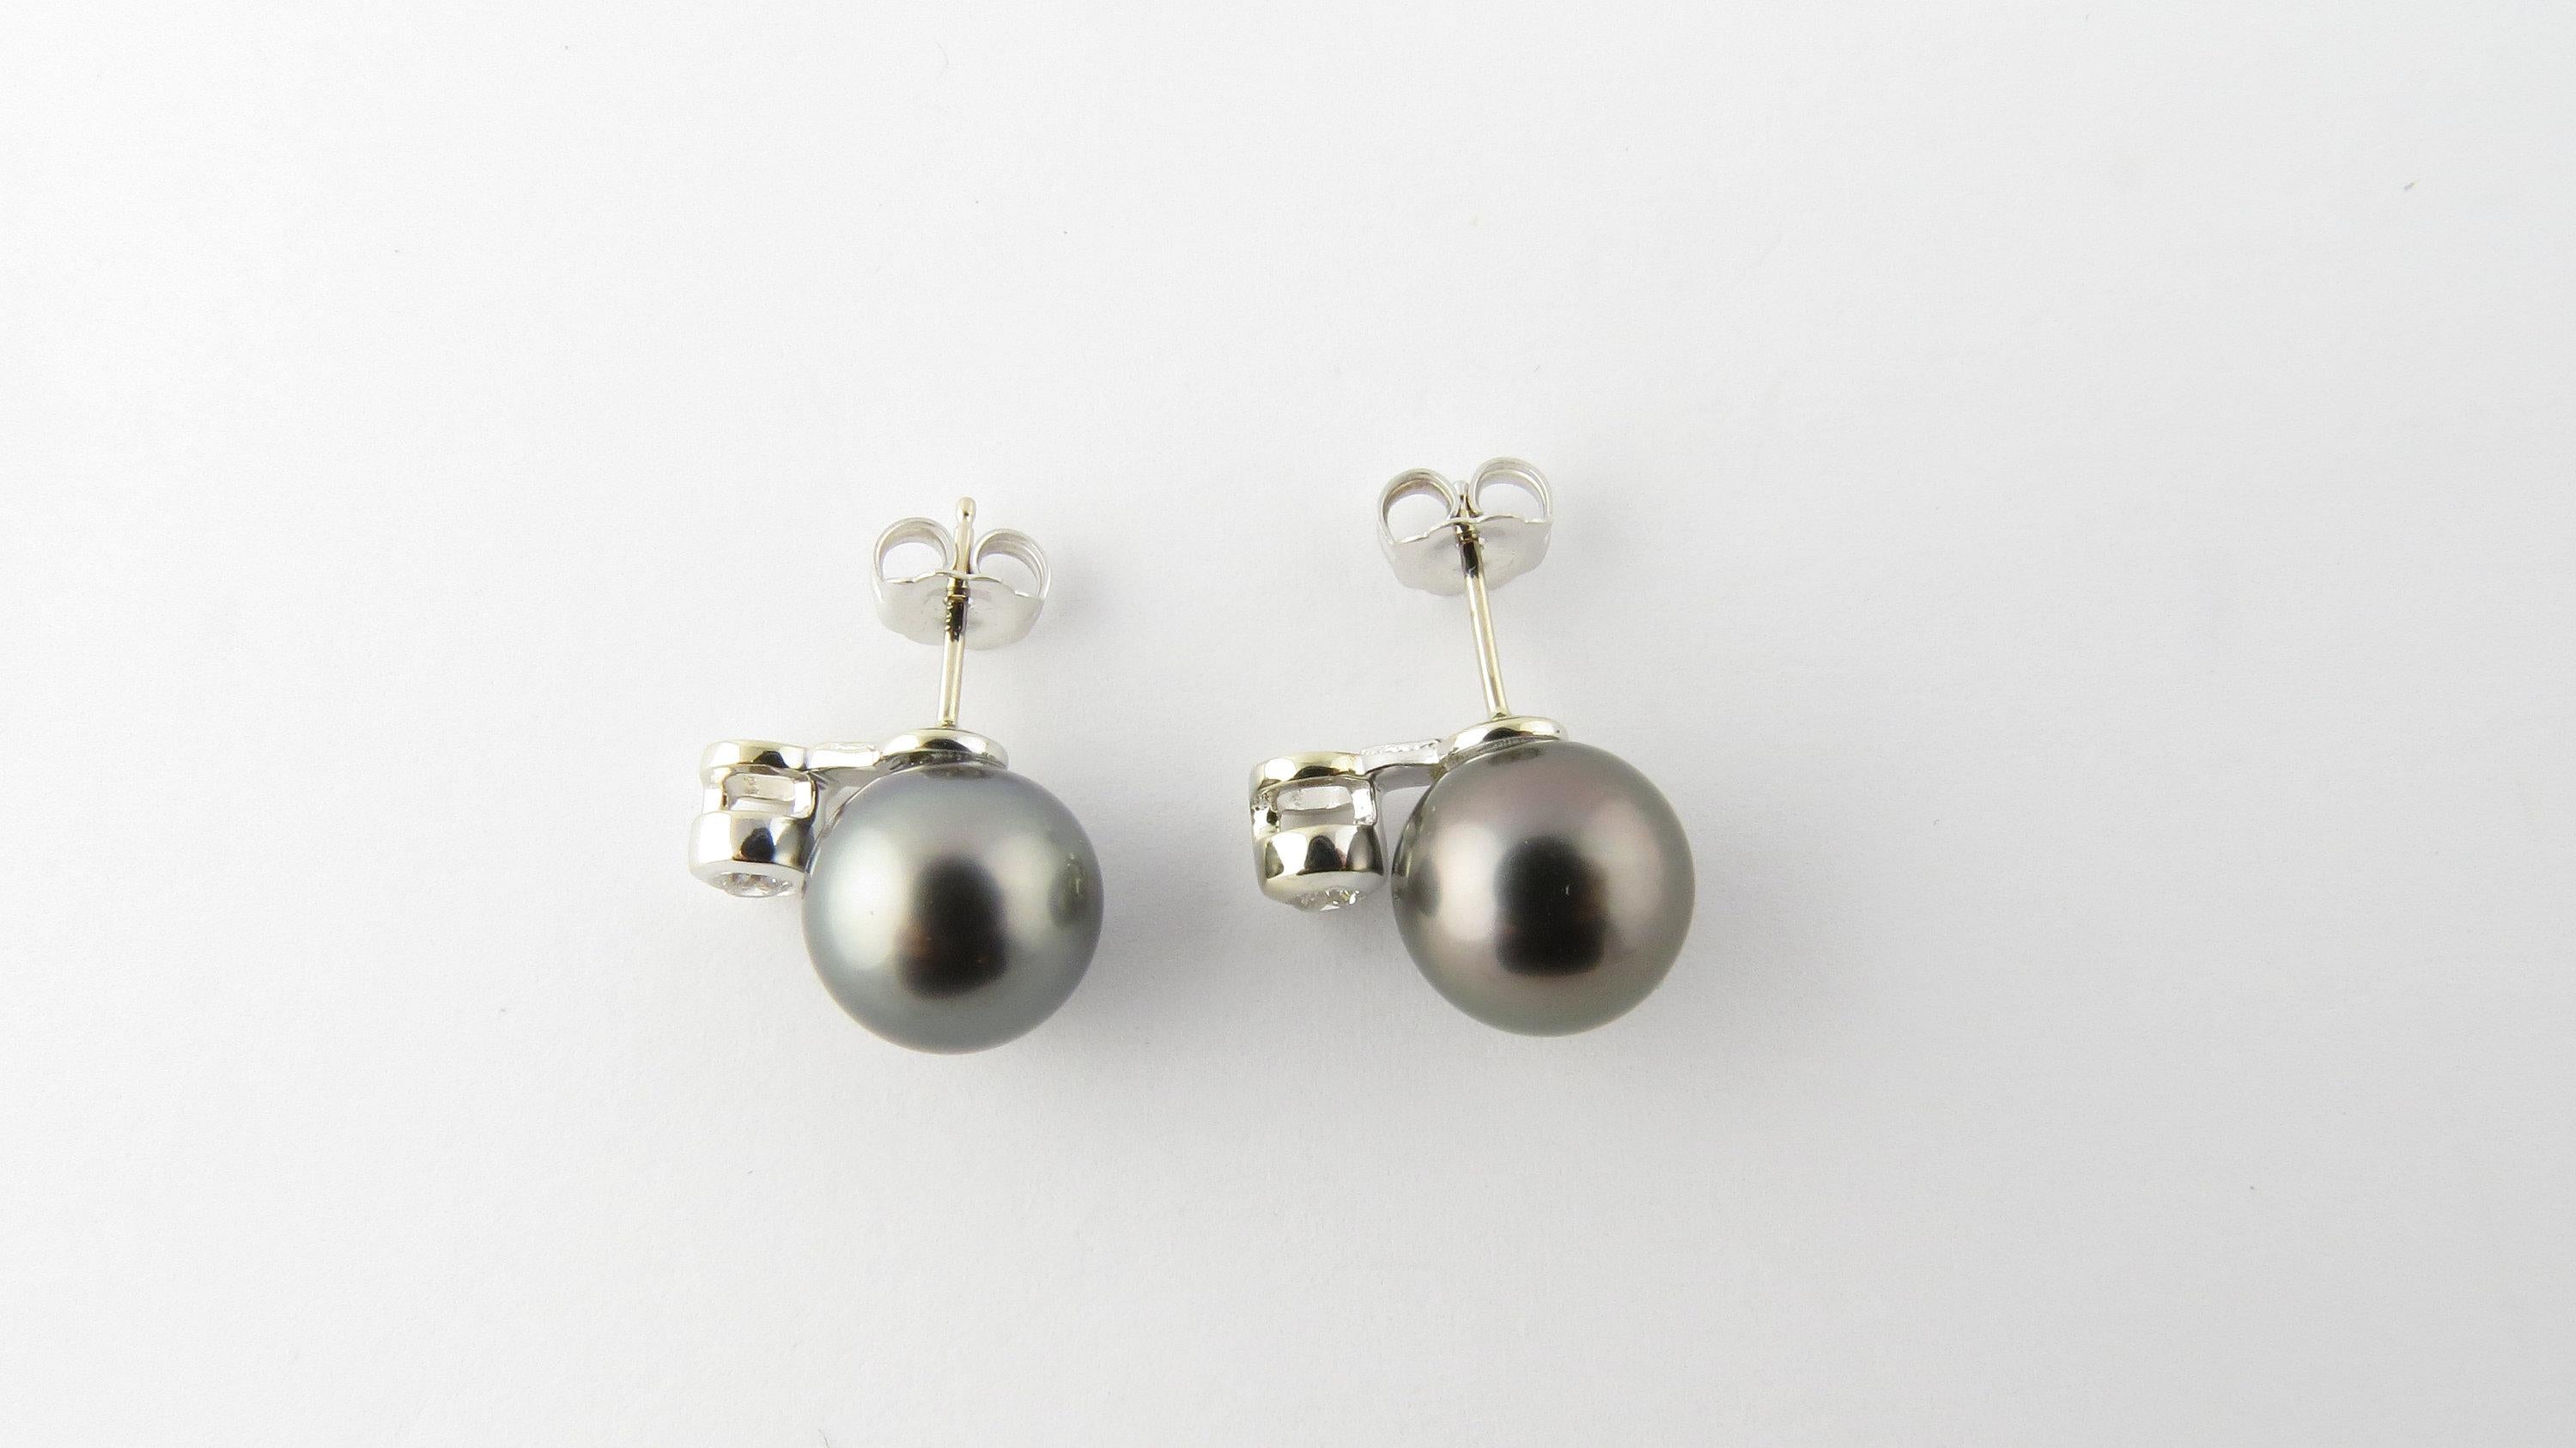 Vintage 14 Karat White Gold Black Pearl and Diamond Earrings-

These stunning earrings each feature one 10 mm black pearl and one round brilliant cut diamond set in beautifully detailed 14K white gold. Push back closures. 
Matching necklace: